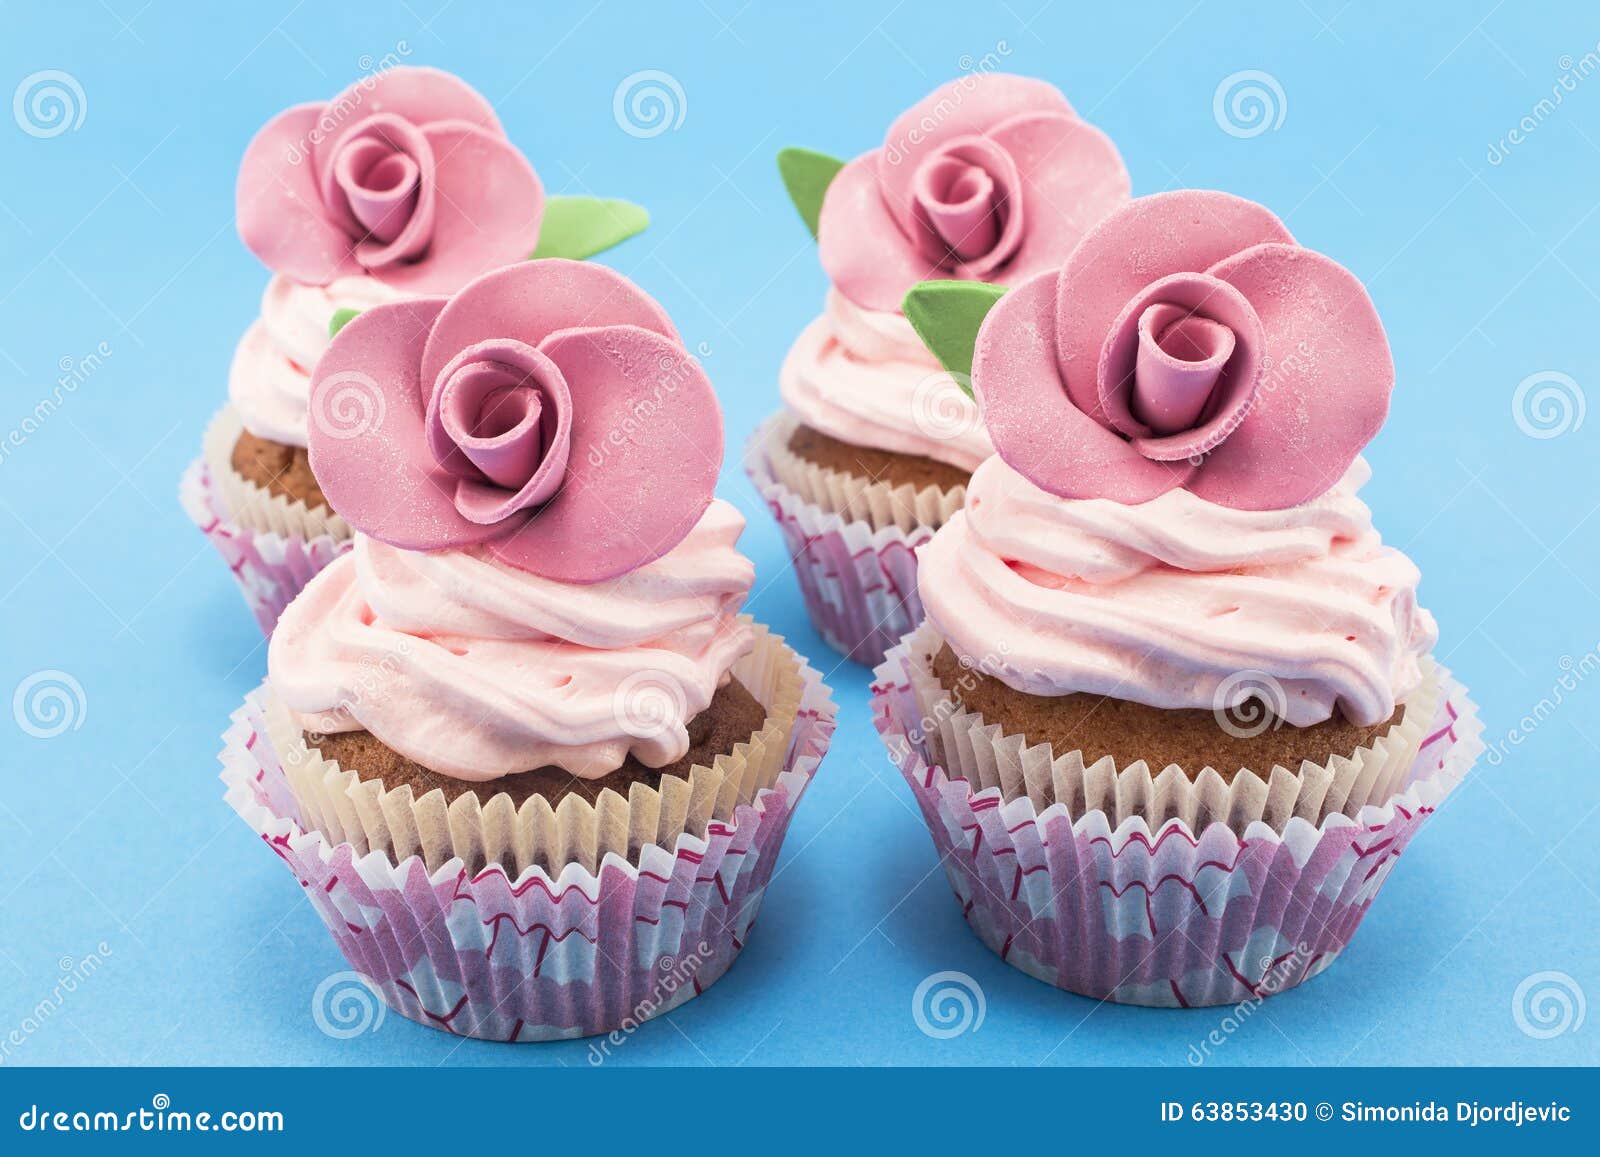 Vintage Cupcakes On A Blue Background Stock Photo - Image of background ...